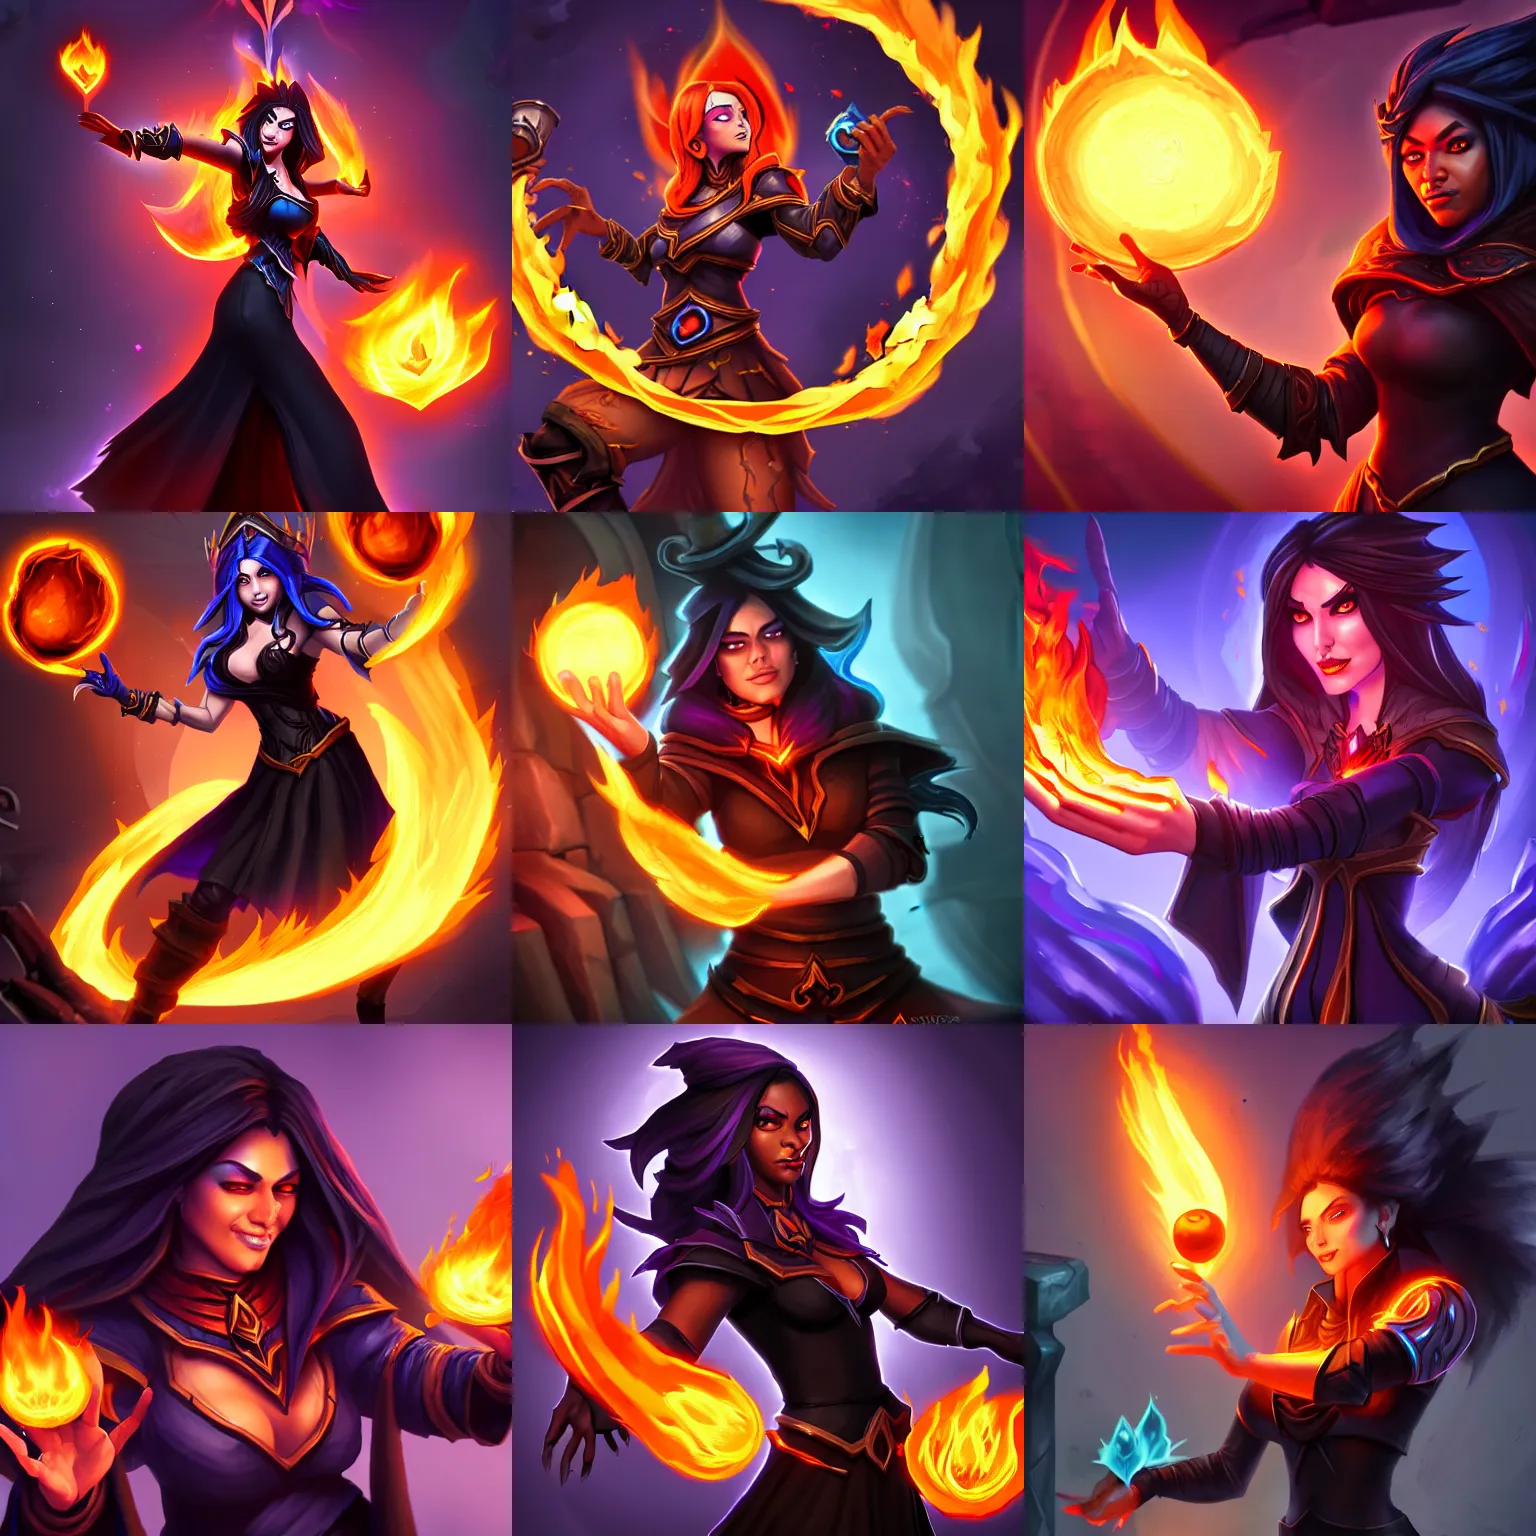 Prompt: A sorceress with black clothed casting a fire ball, Hearthstone official splash art, Heartstone original art style, artstationHQ